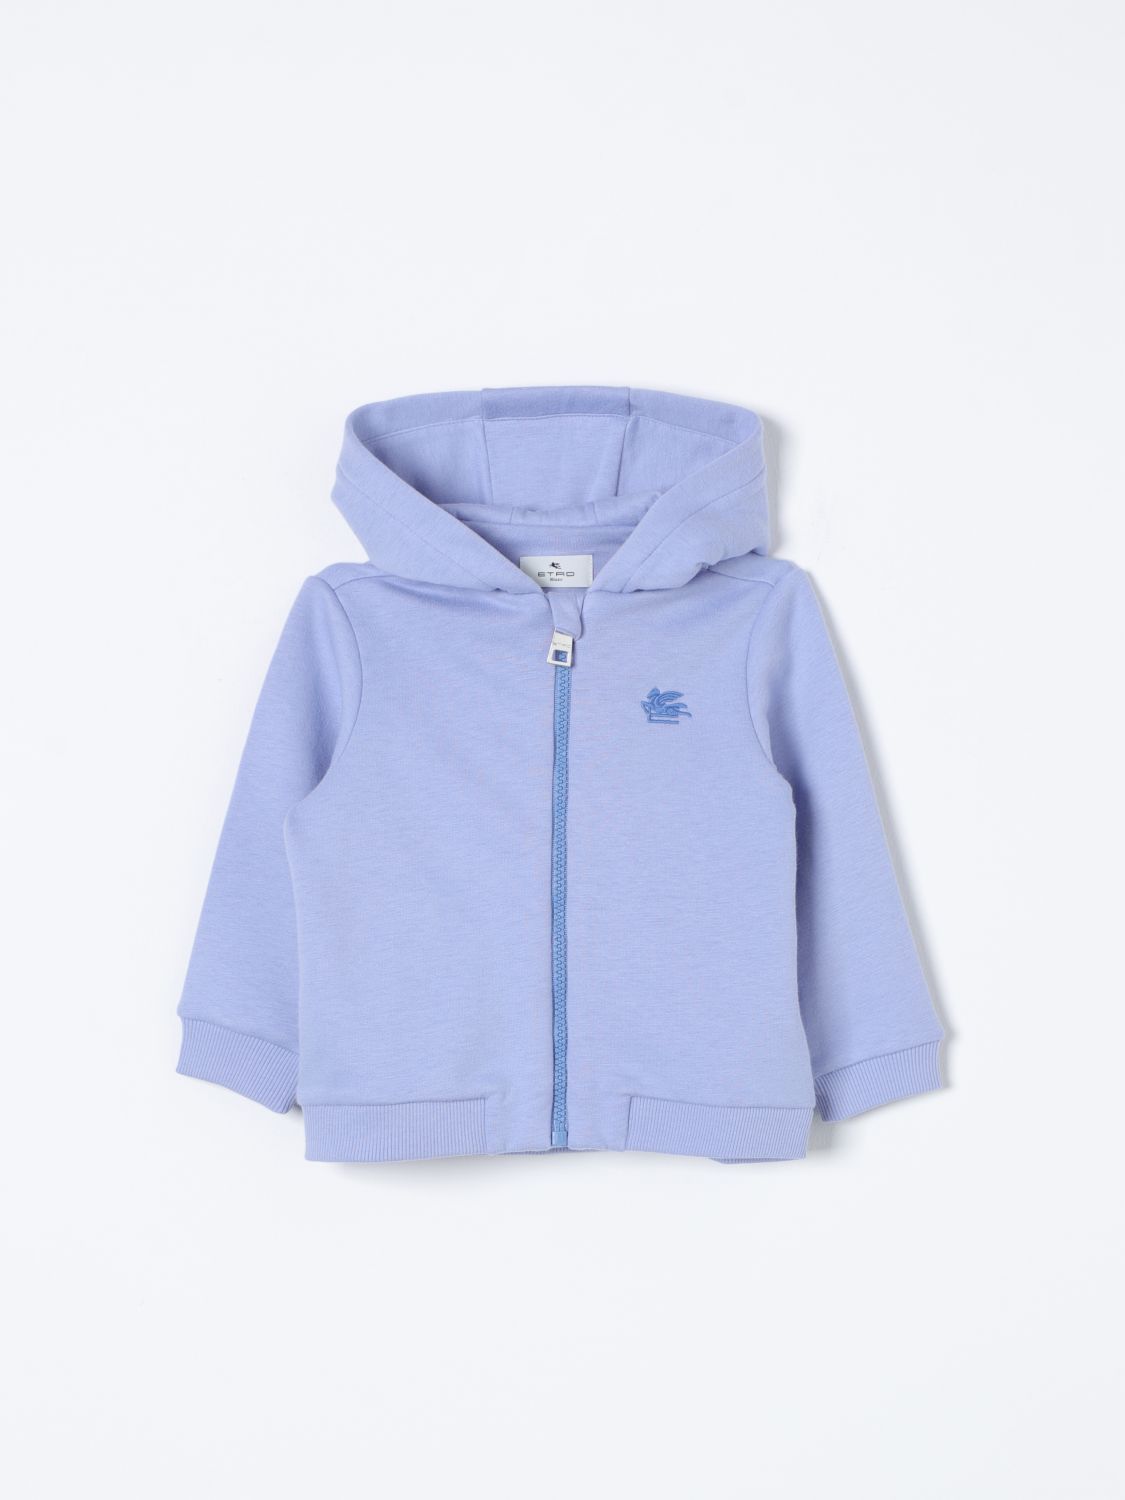 Etro Babies' Sweater  Kids Kids Color Gnawed Blue